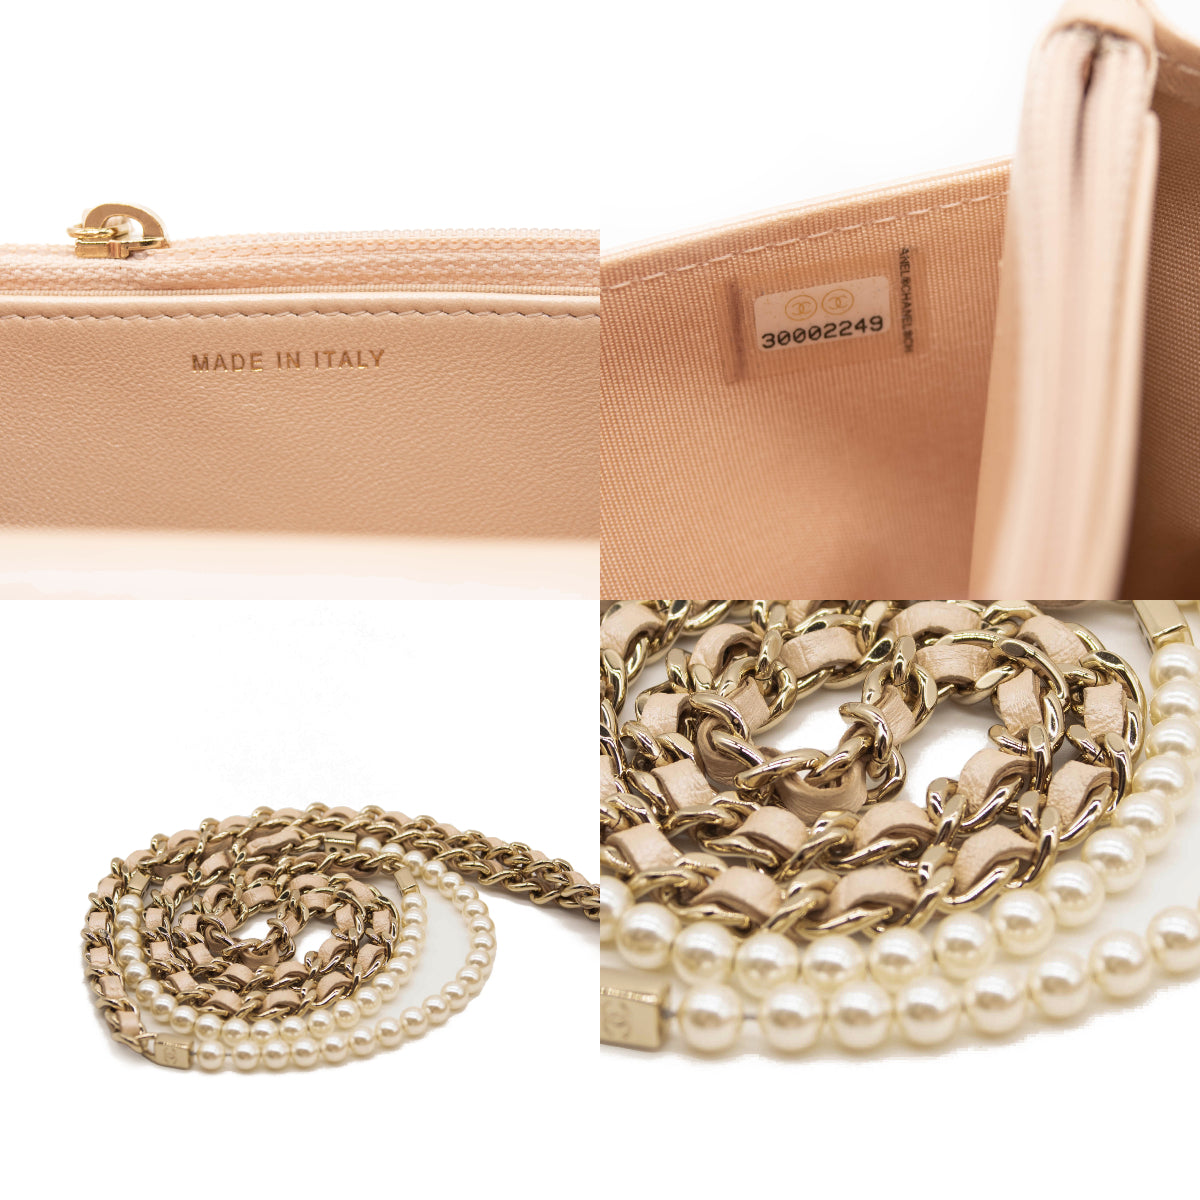 Chanel Iridescent Lambskin Quilted Pearl Wallet On Chain WOC Light Bei -  MyDesignerly